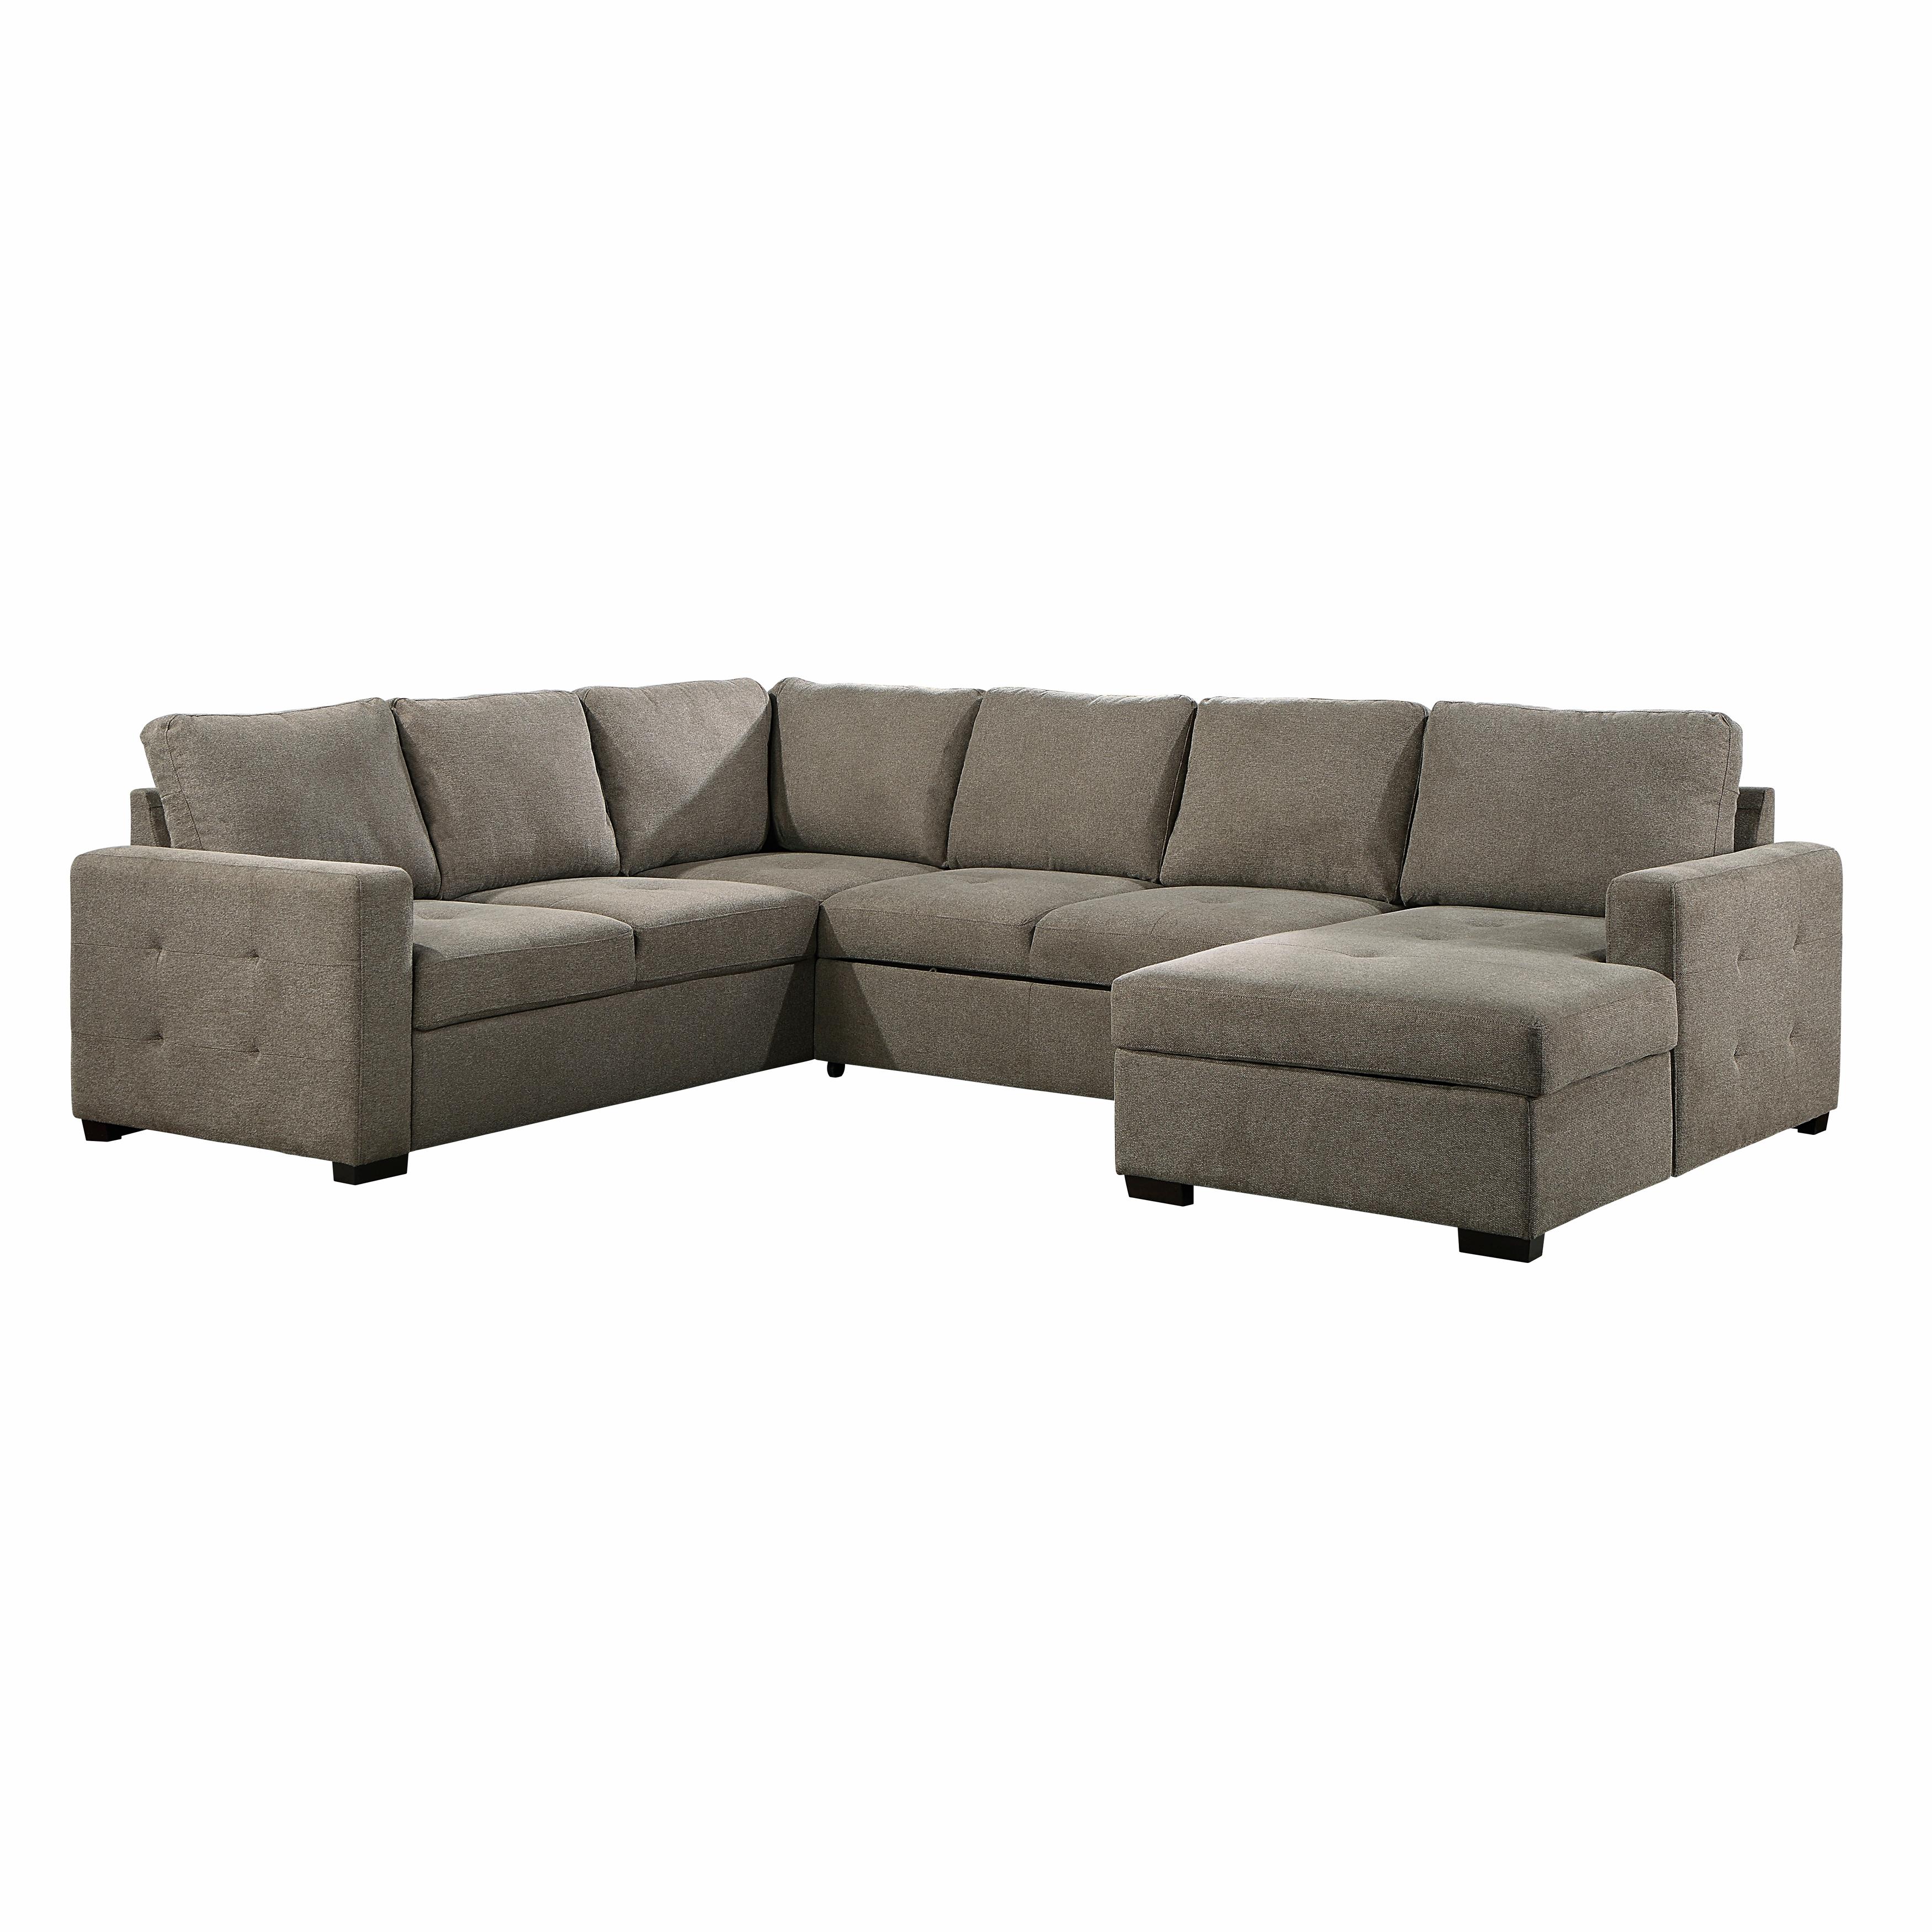 

    
Transitional Brown Textured RHC 3-Piece Sectional Homelegance 9206BR*33LRC Elton
